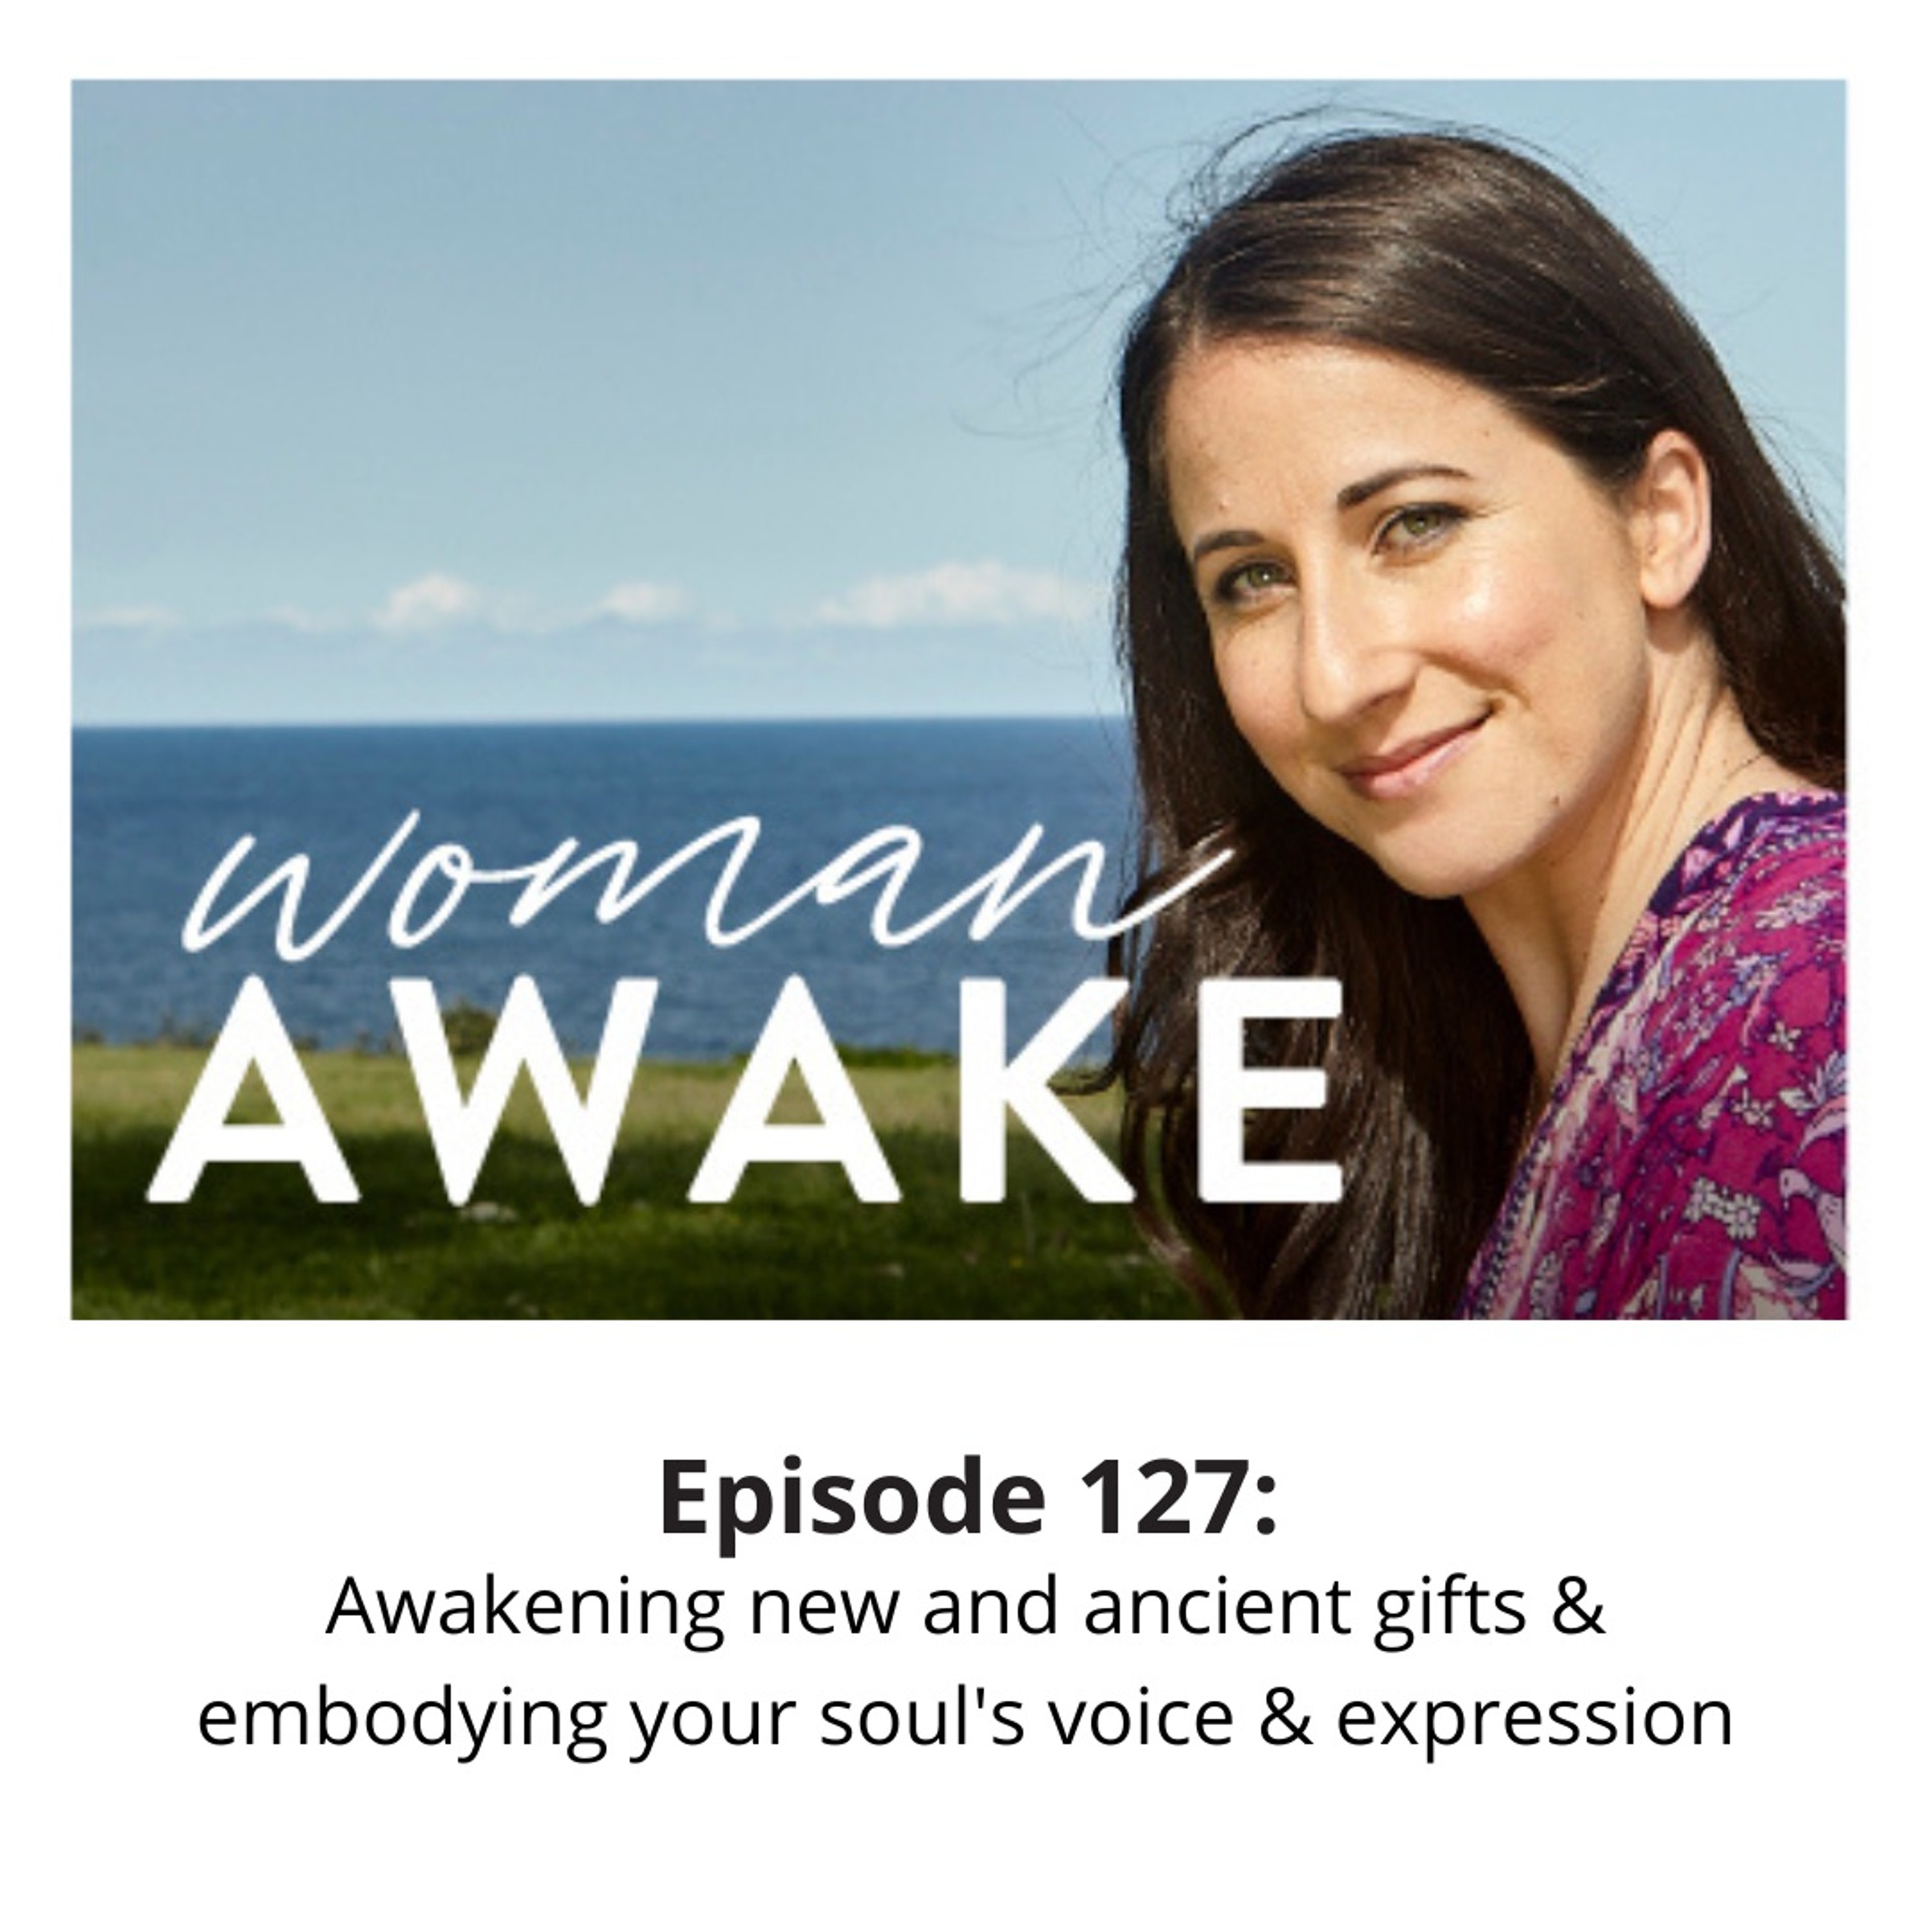 Woman Awake Episode 127: Awakening new gifts and embodying your soul's voice and expression.